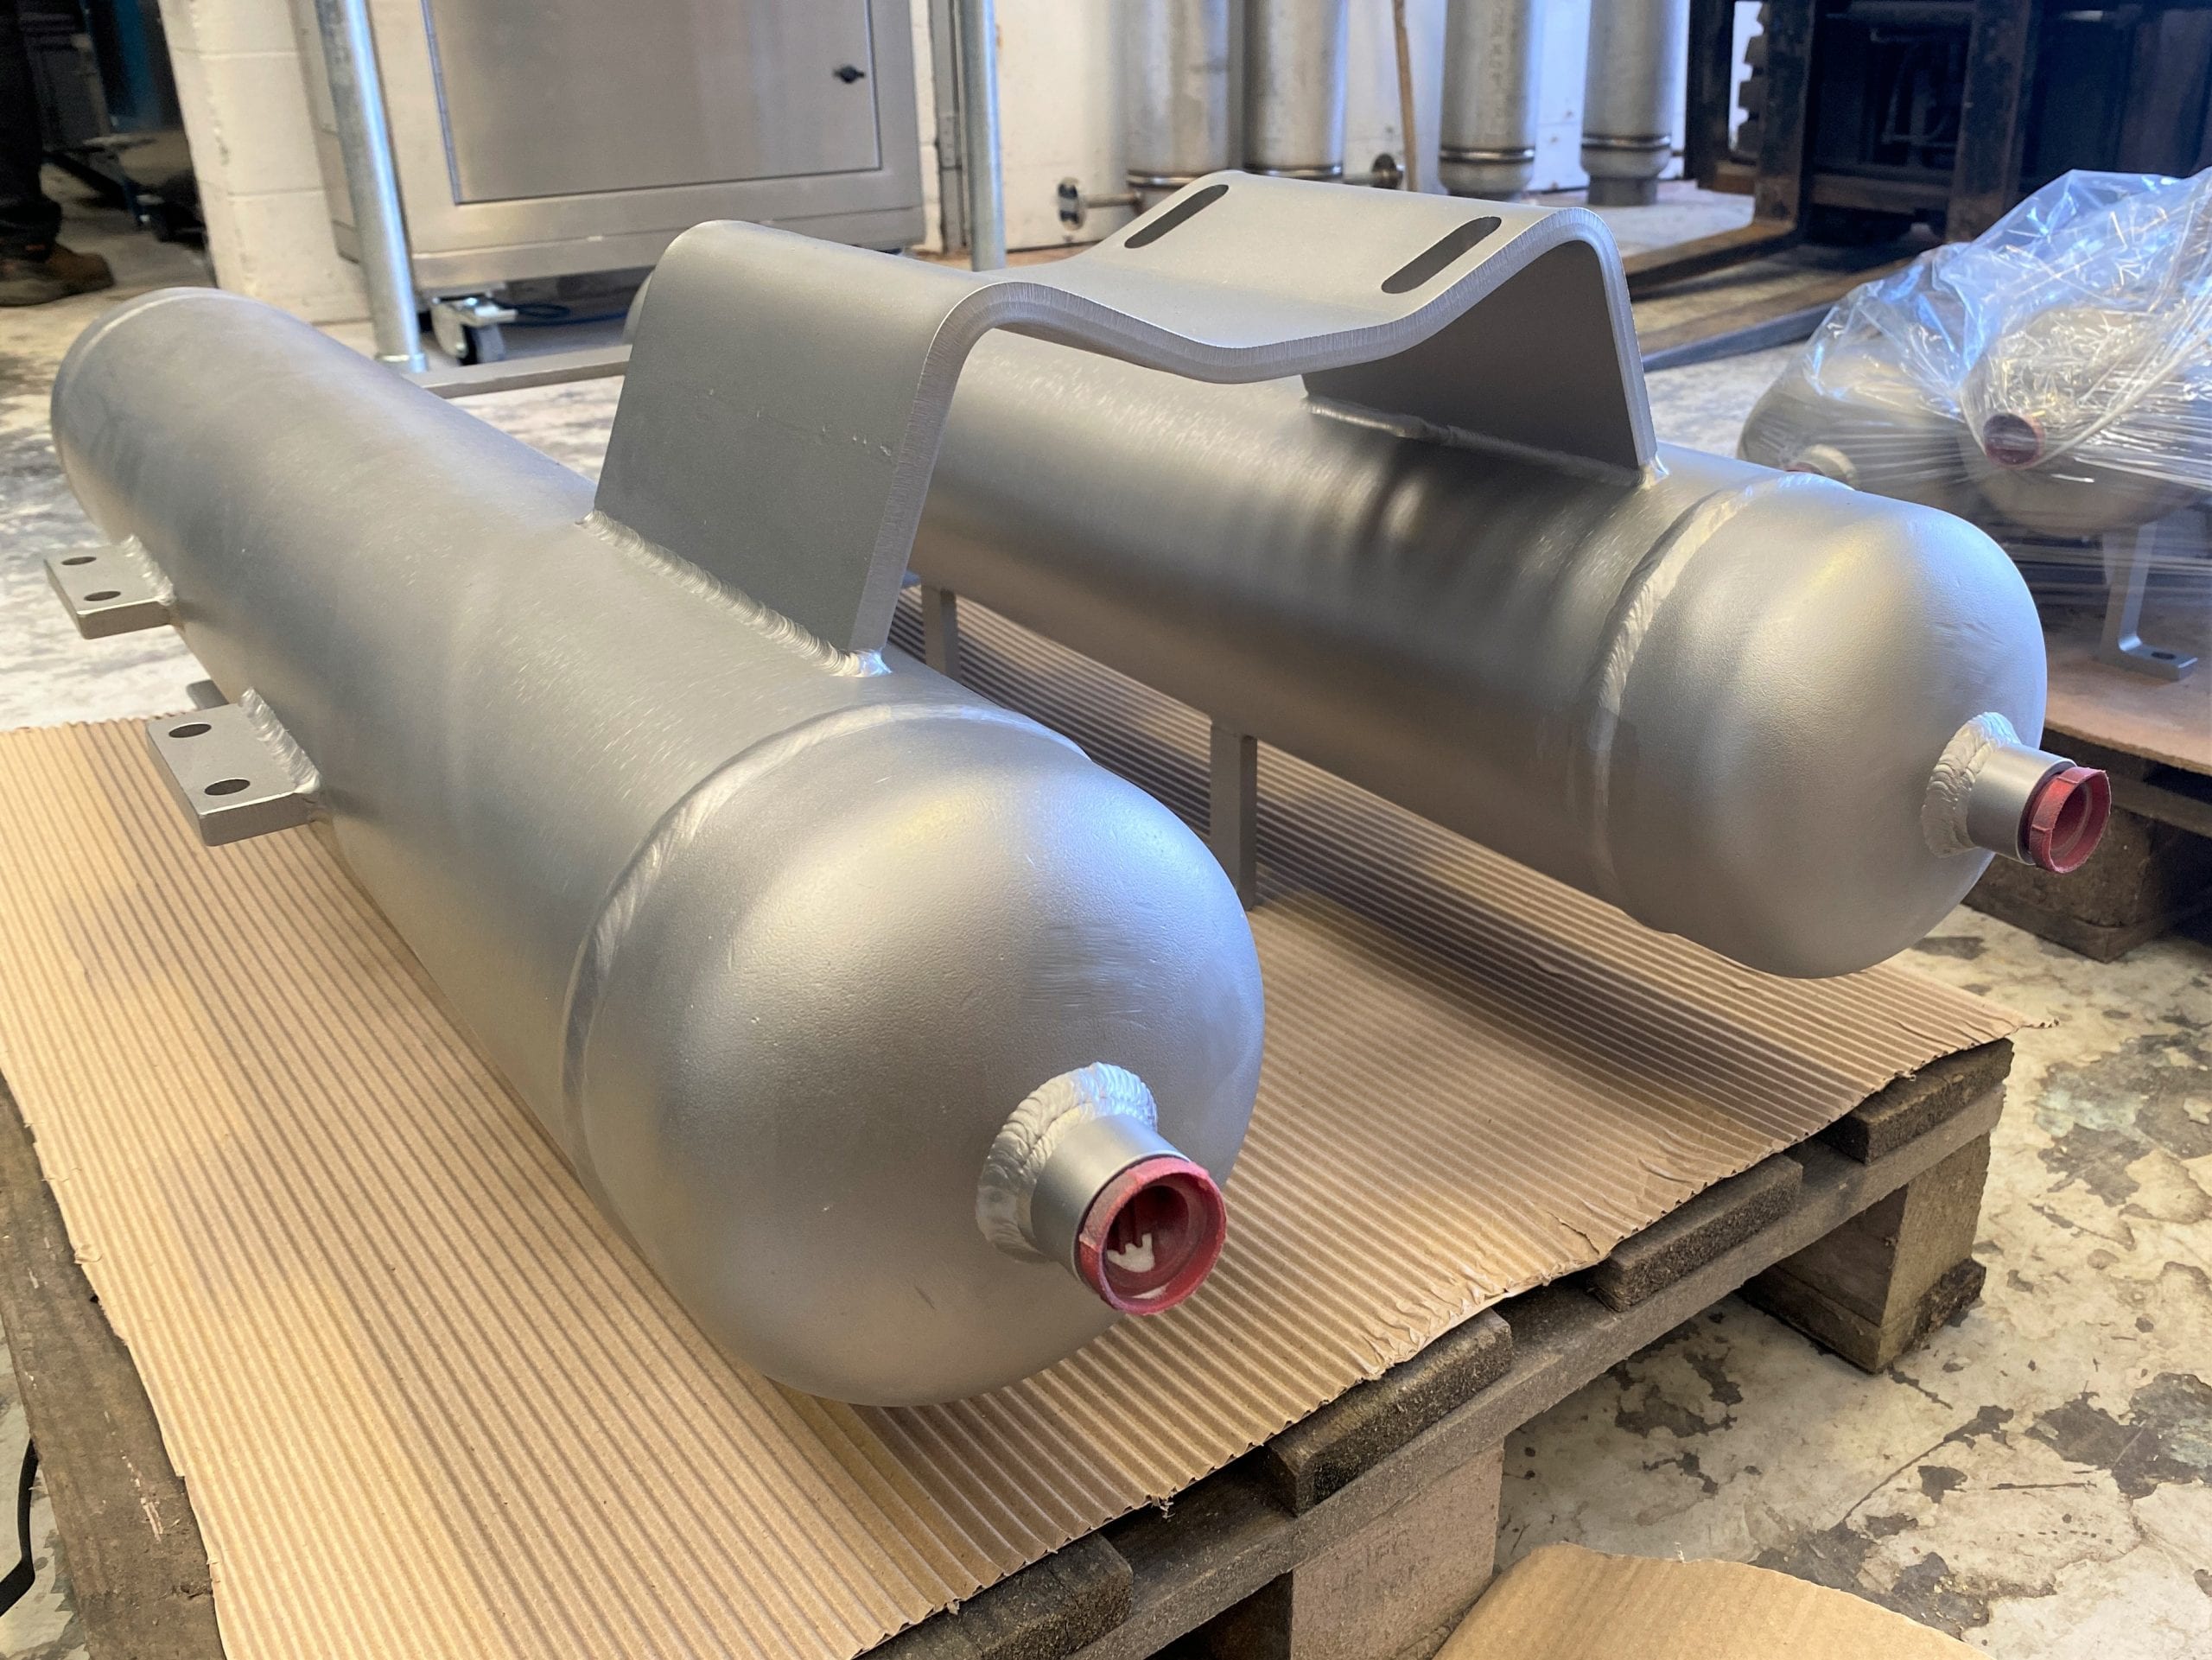 UKCA Mark Pressure Vessels from Stainless steel 316/L